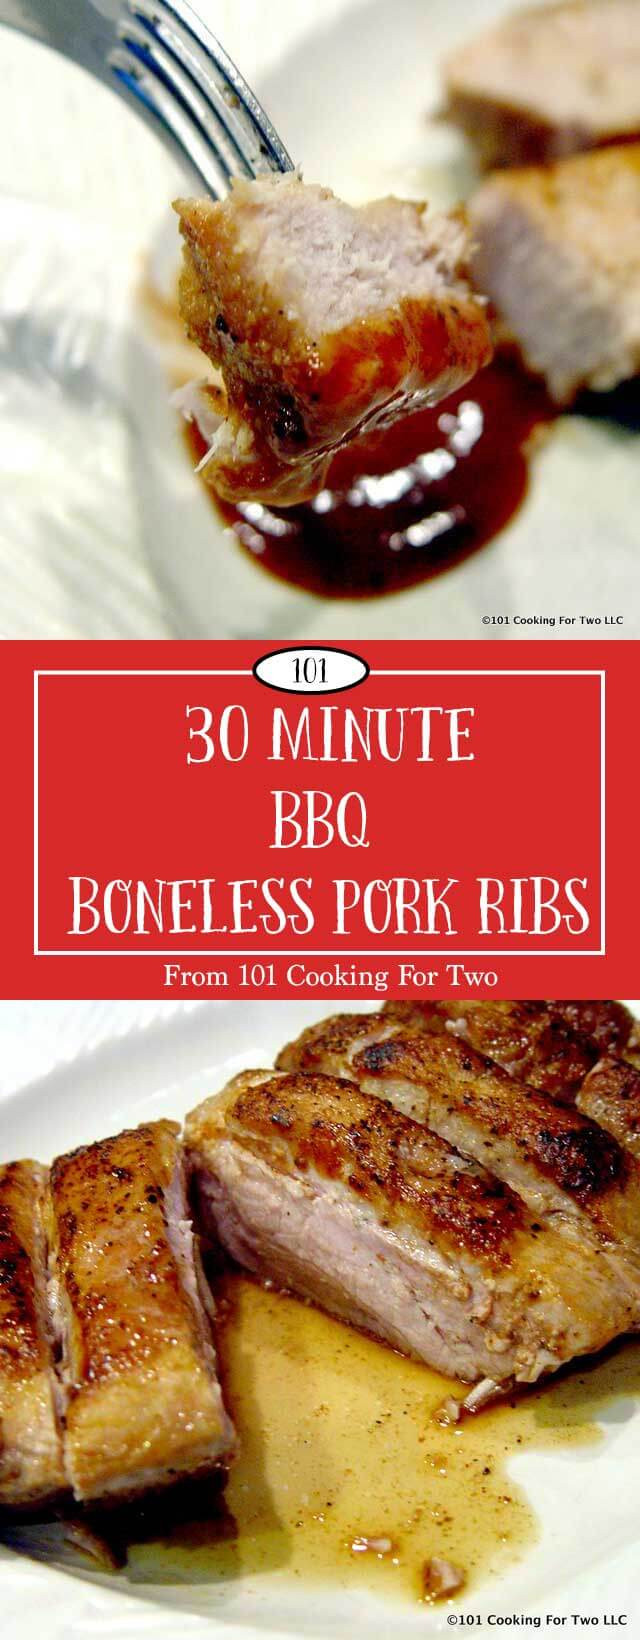 How Long To Cook Boneless Pork Ribs In Oven At 350
 how long does it take to cook boneless pork ribs in the oven